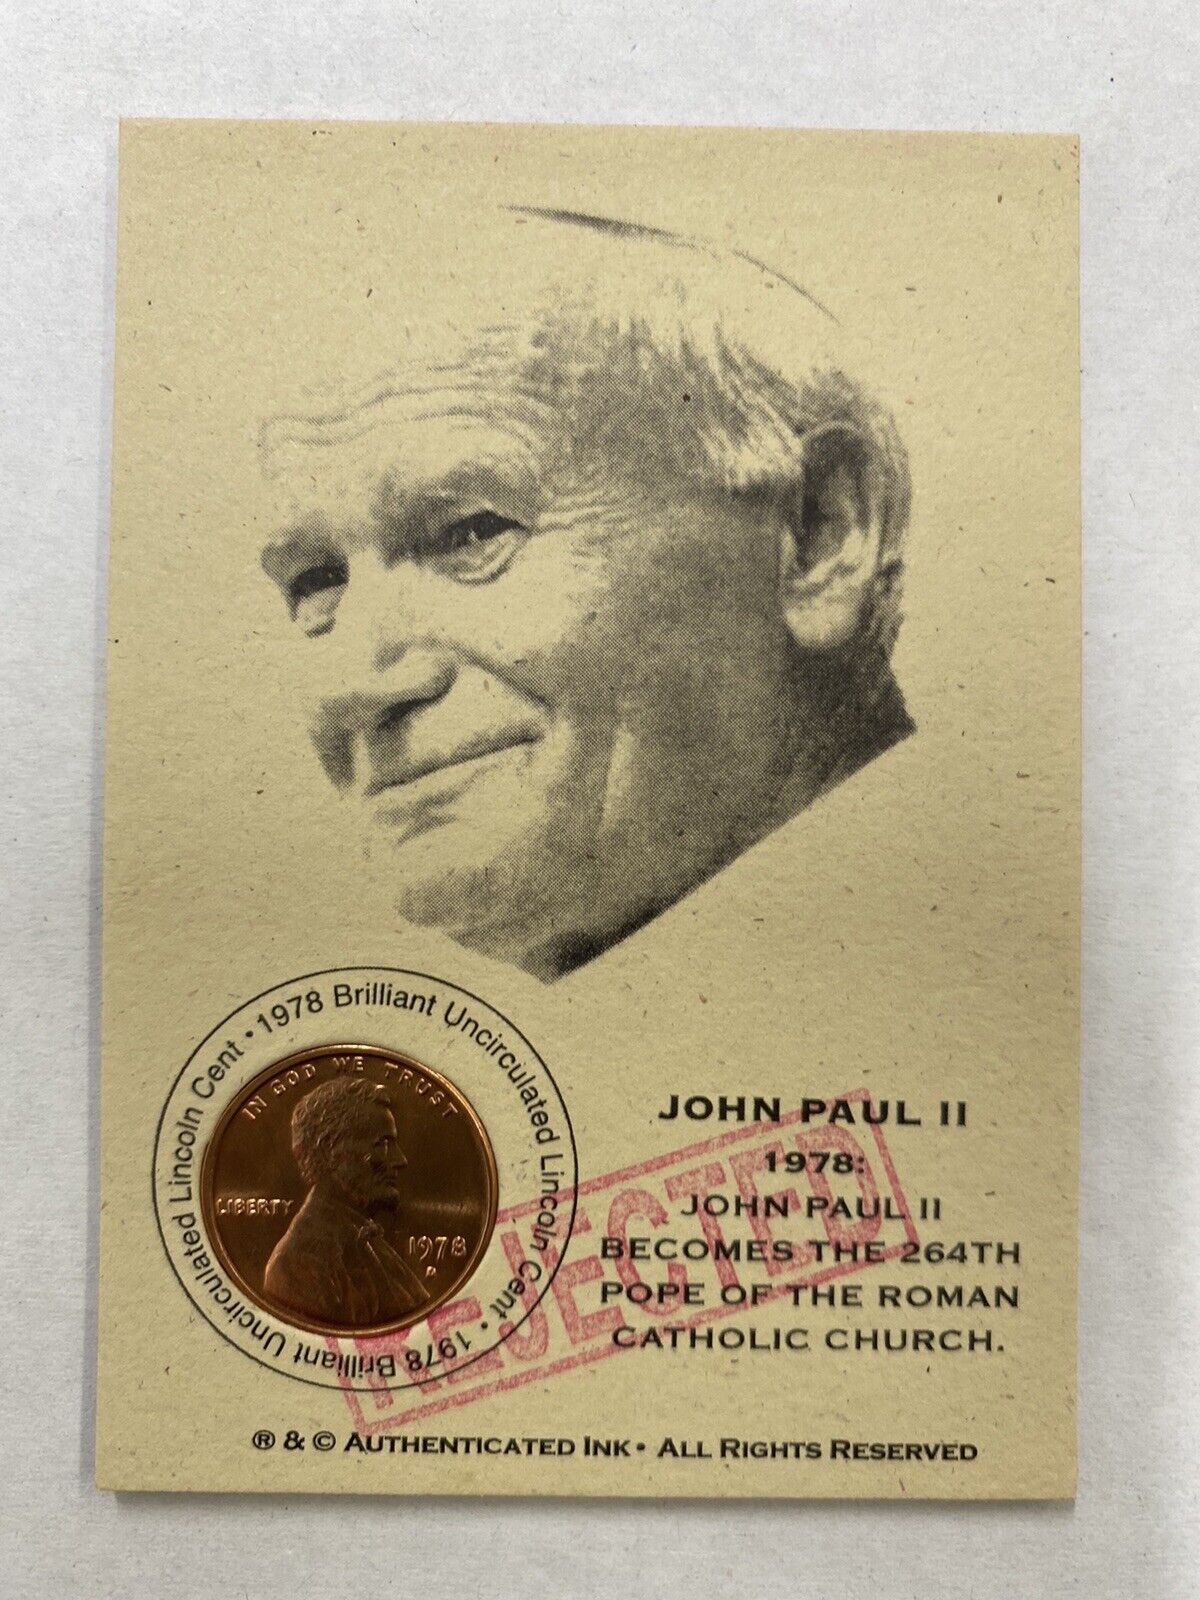 Pope John Paul II REJECTED Authenticated Ink 1978 Uncirculated Lincoln Mem Card